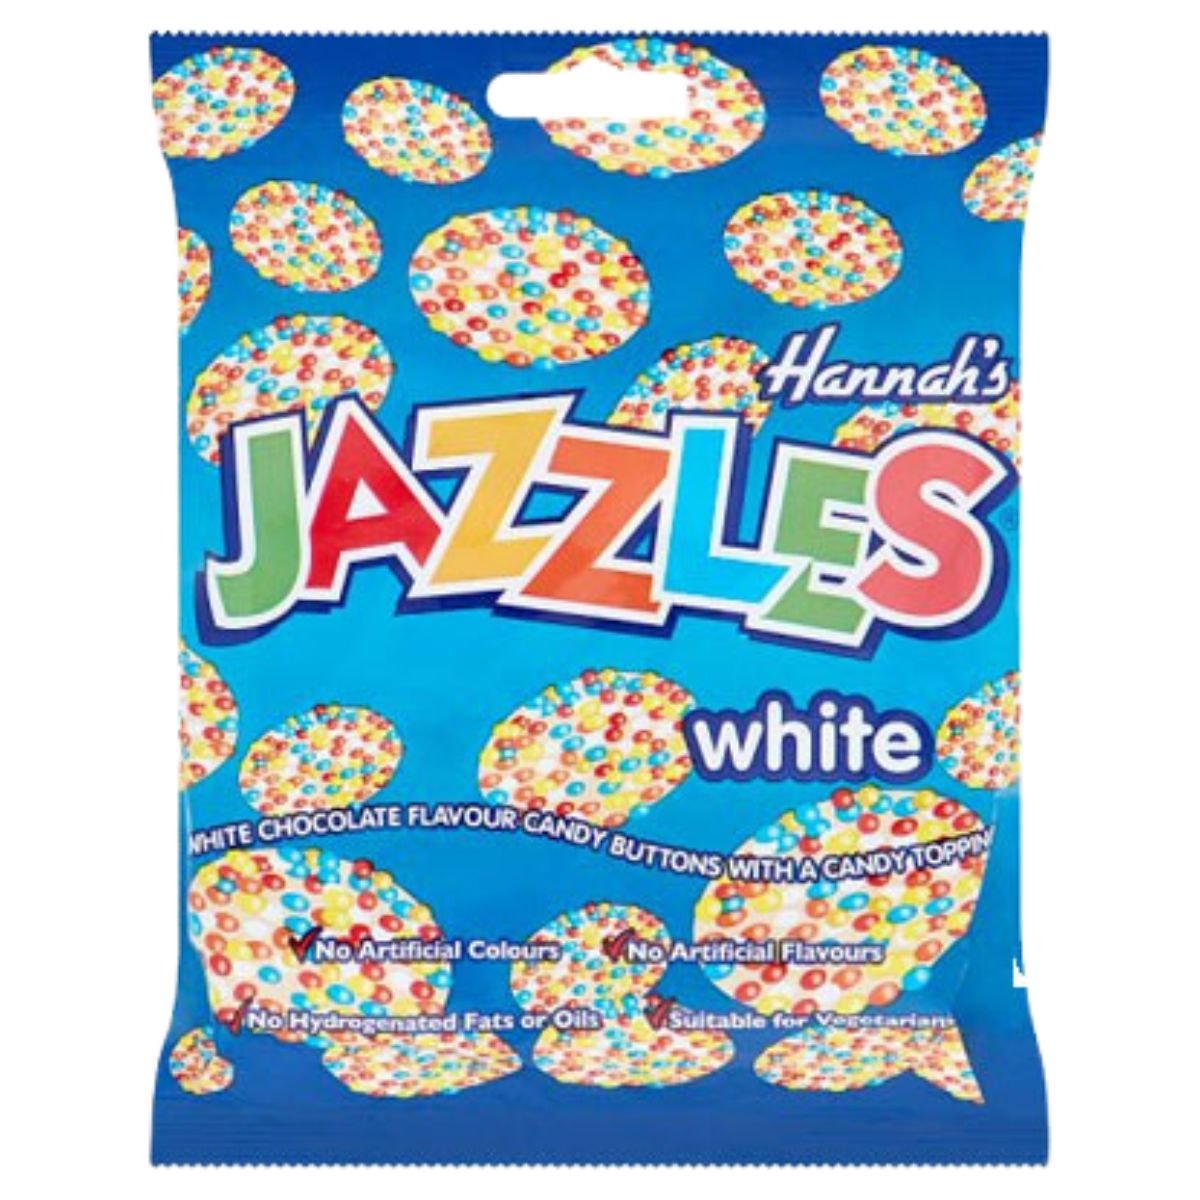 A bag of Hannahs - Jazzles White - 140g candy.